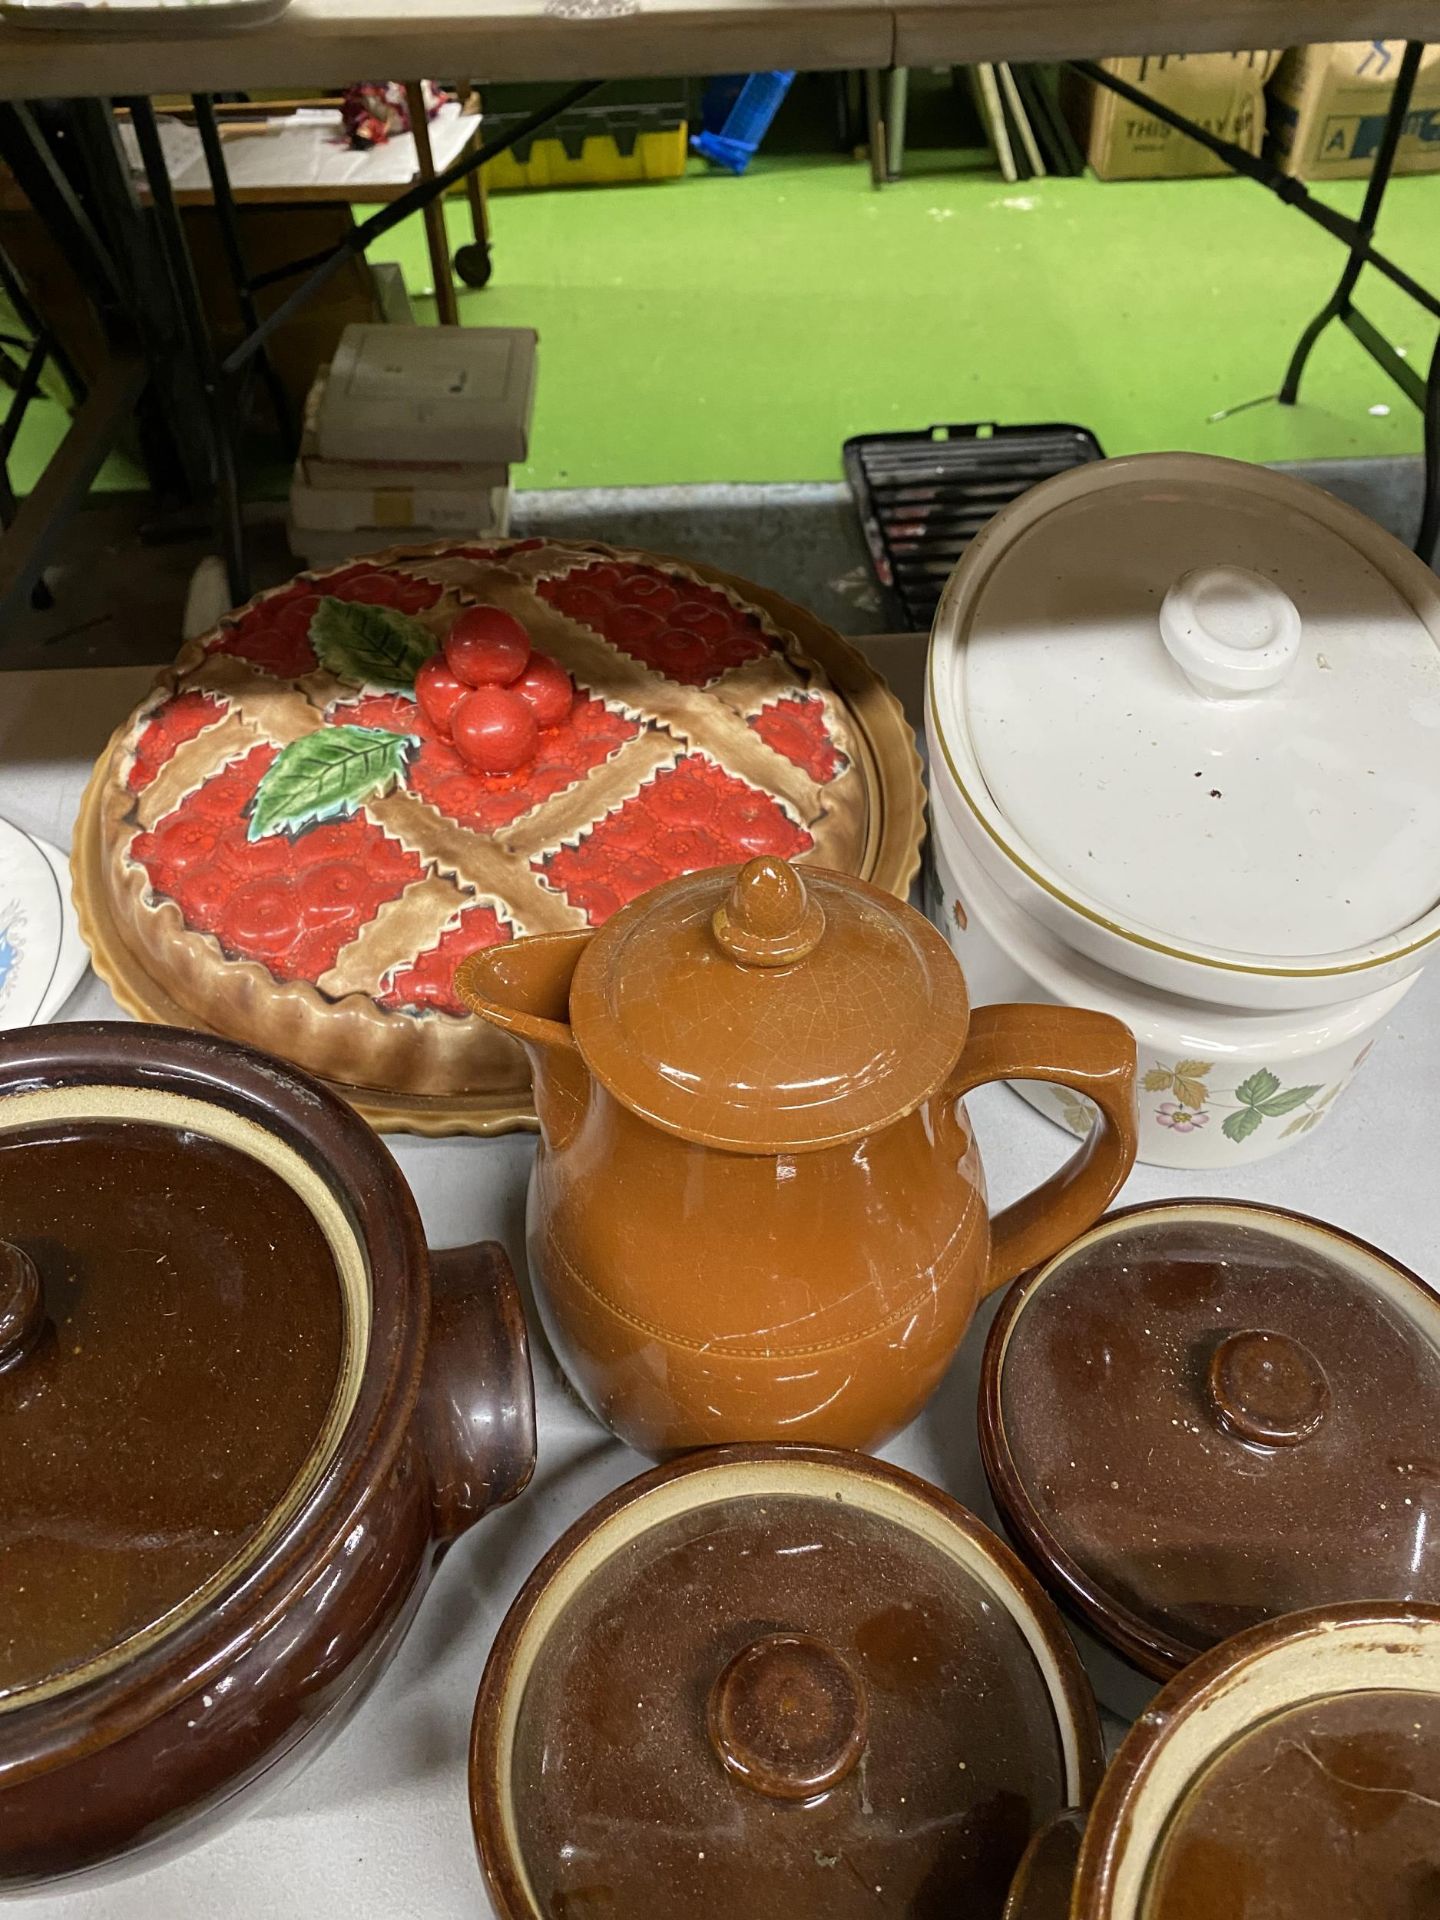 A QUANTITY OF VINTAGE STONEWARE ITEMS TO INCLUDE A TEA AND COFFEE POT, STORAGE CONTAINERS, A PIE - Image 2 of 3